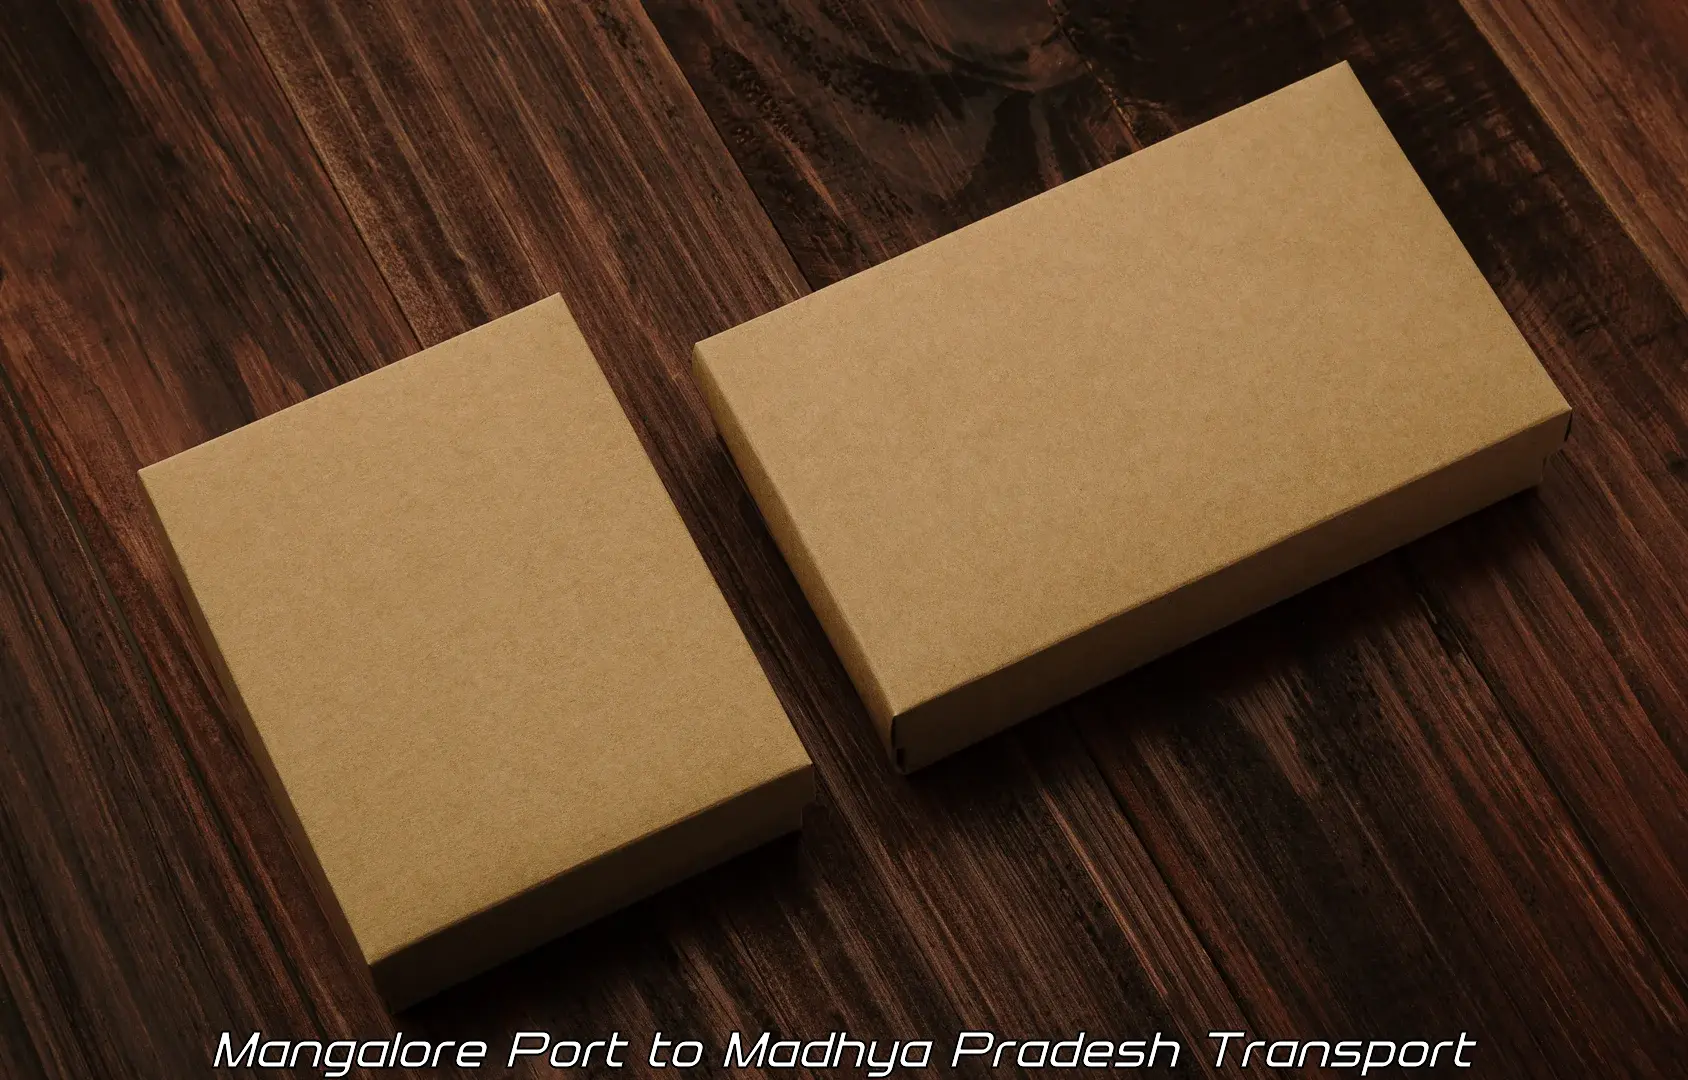 Two wheeler parcel service Mangalore Port to Junnardeo